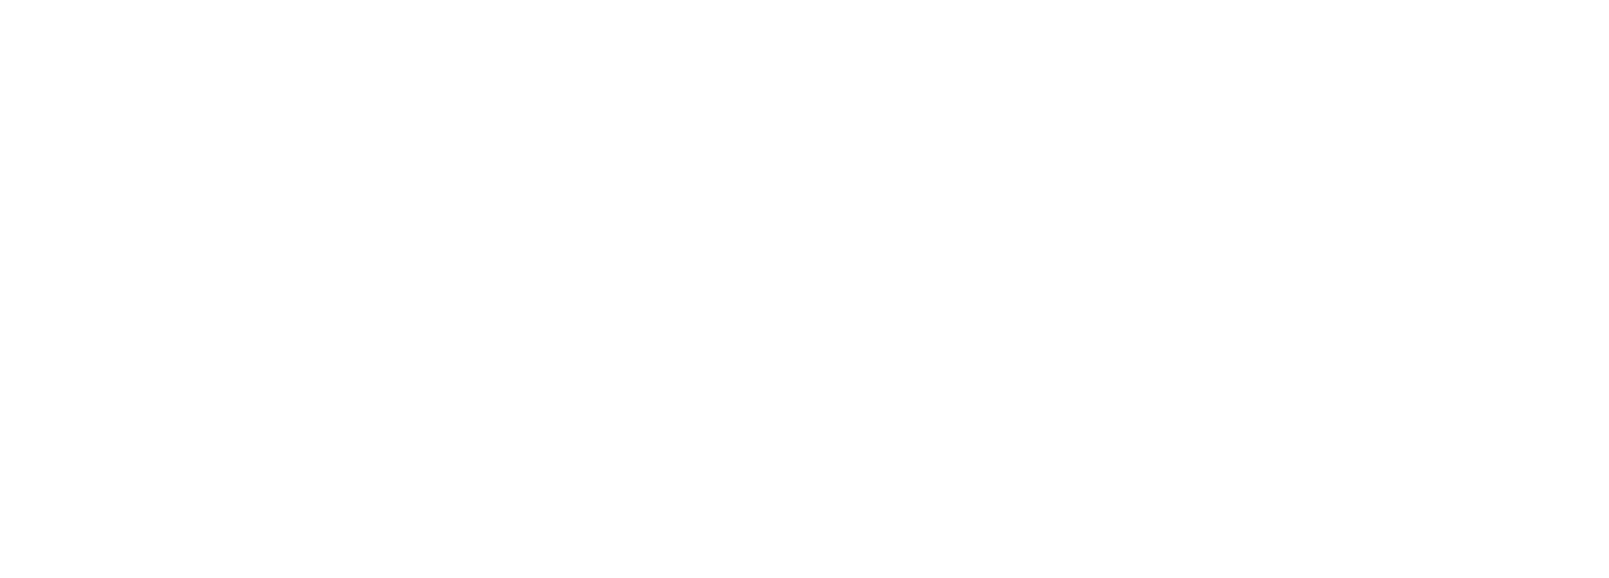 Qurate Retail Group logo large for dark backgrounds (transparent PNG)